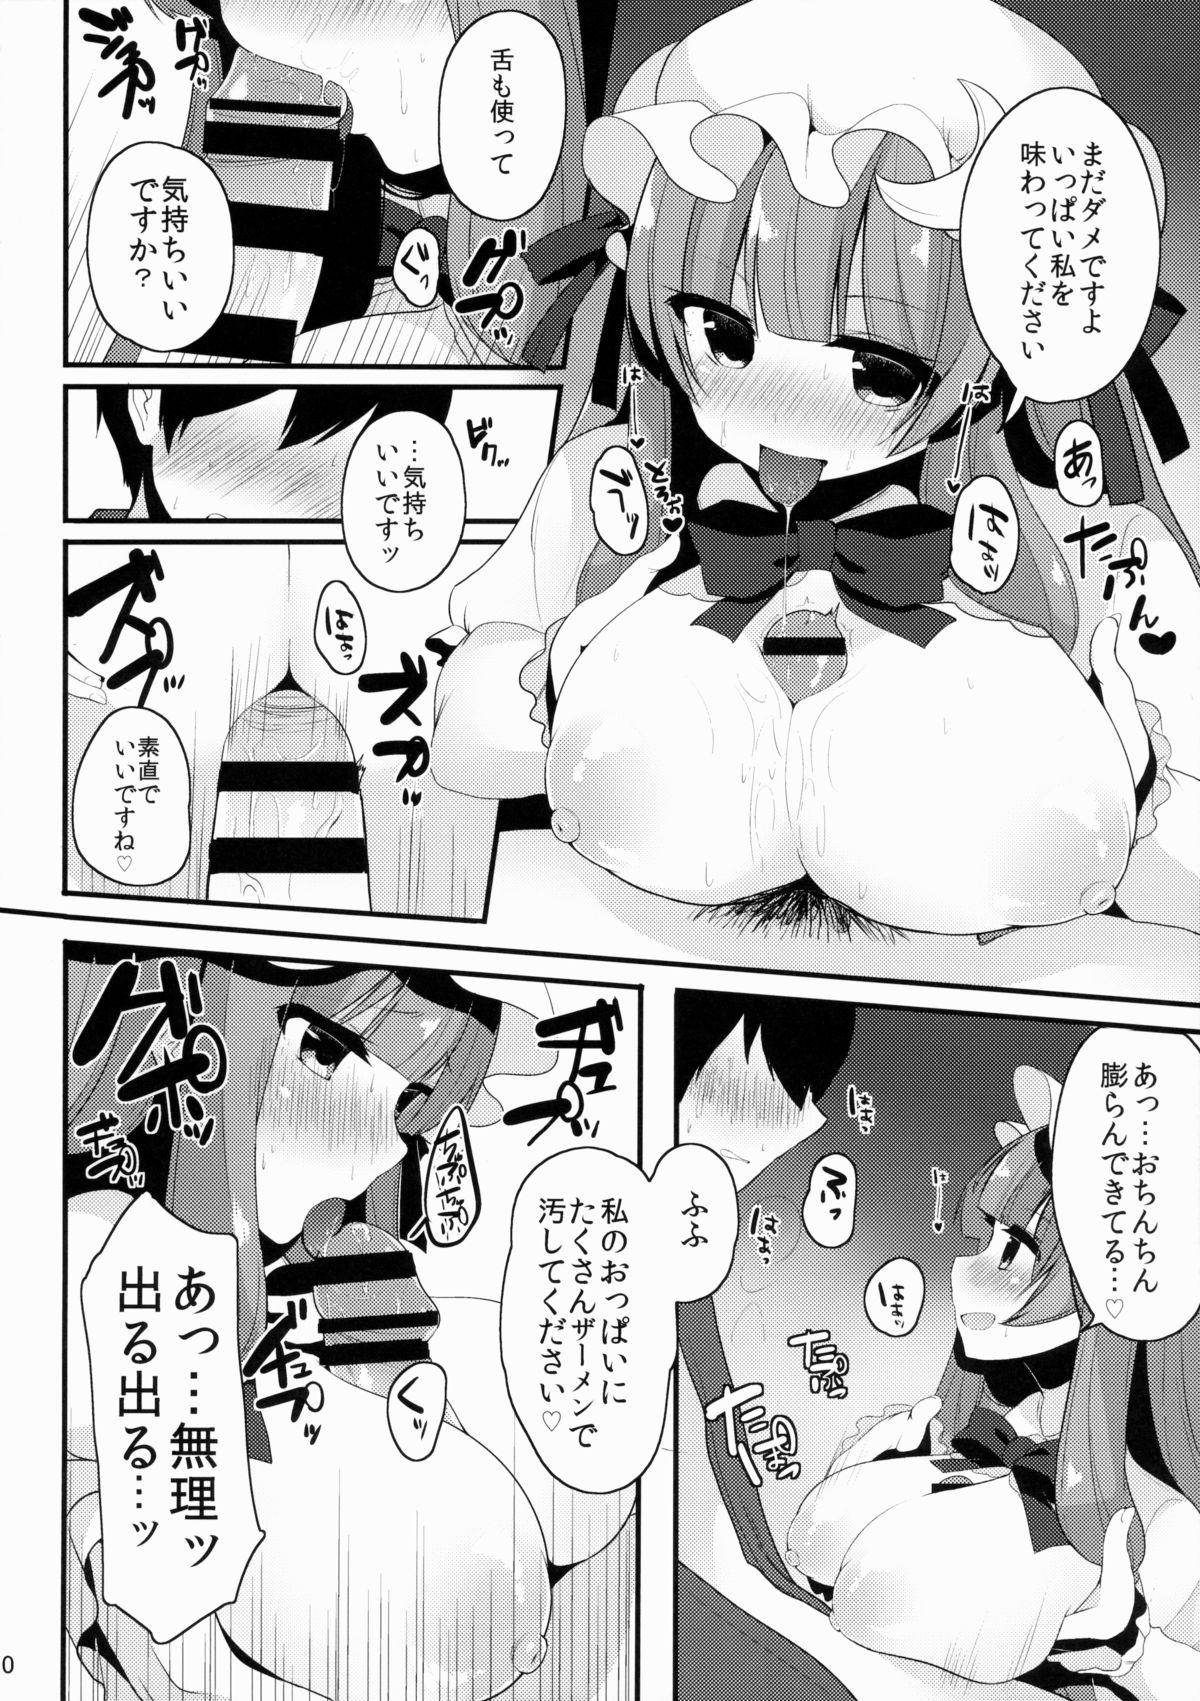 Pendeja Oshigoto Patche-x - Touhou project Old Vs Young - Page 11